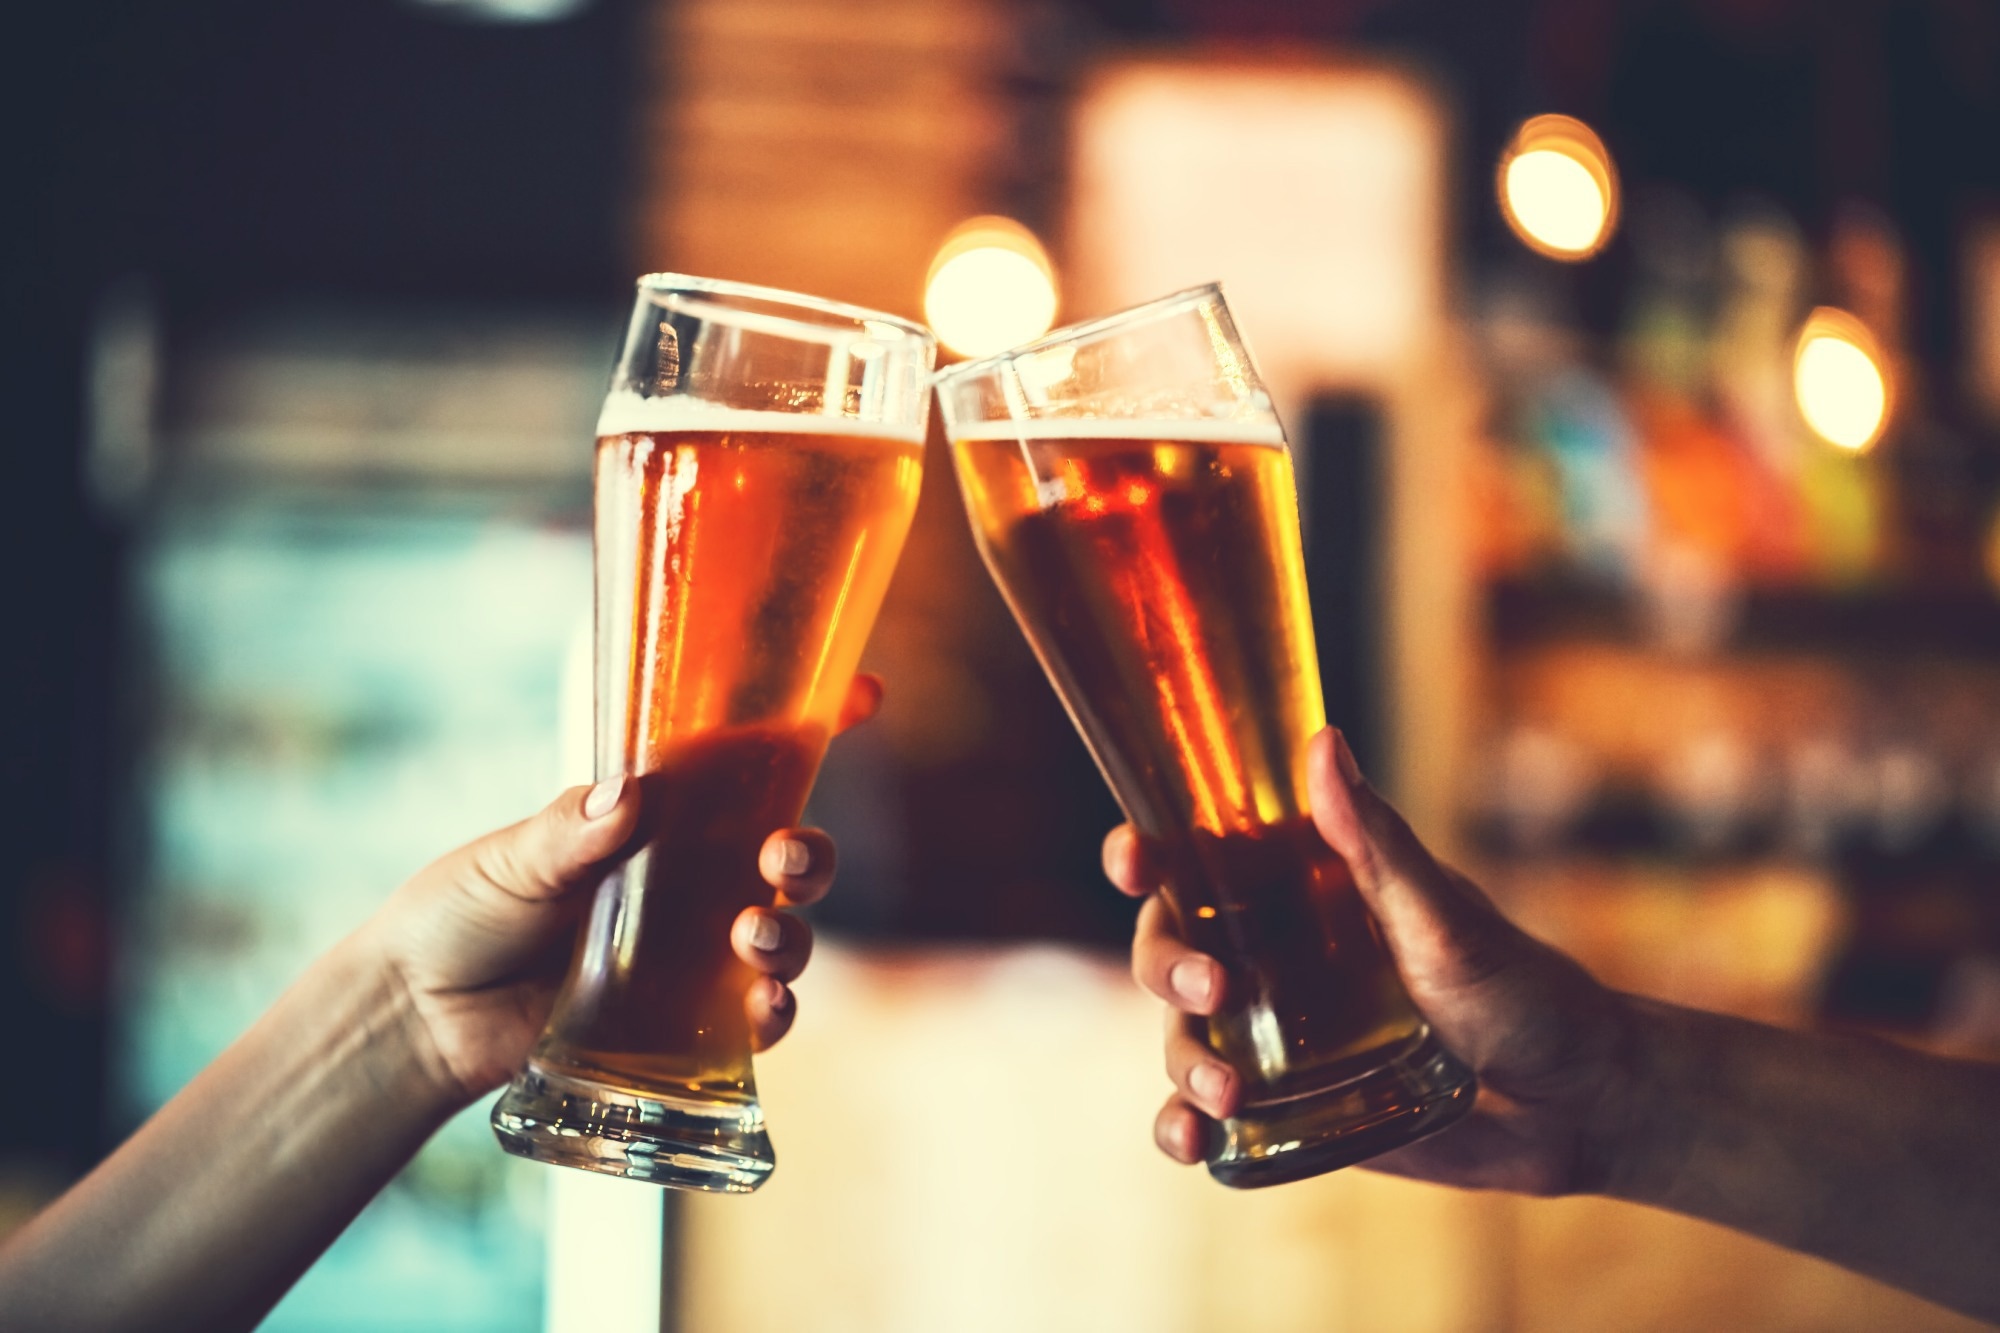 Study: The relationship between alcohol consumption and health: J-shaped or not is more?  Image Credit: Ievgenii Meyer/Shutterstock.com